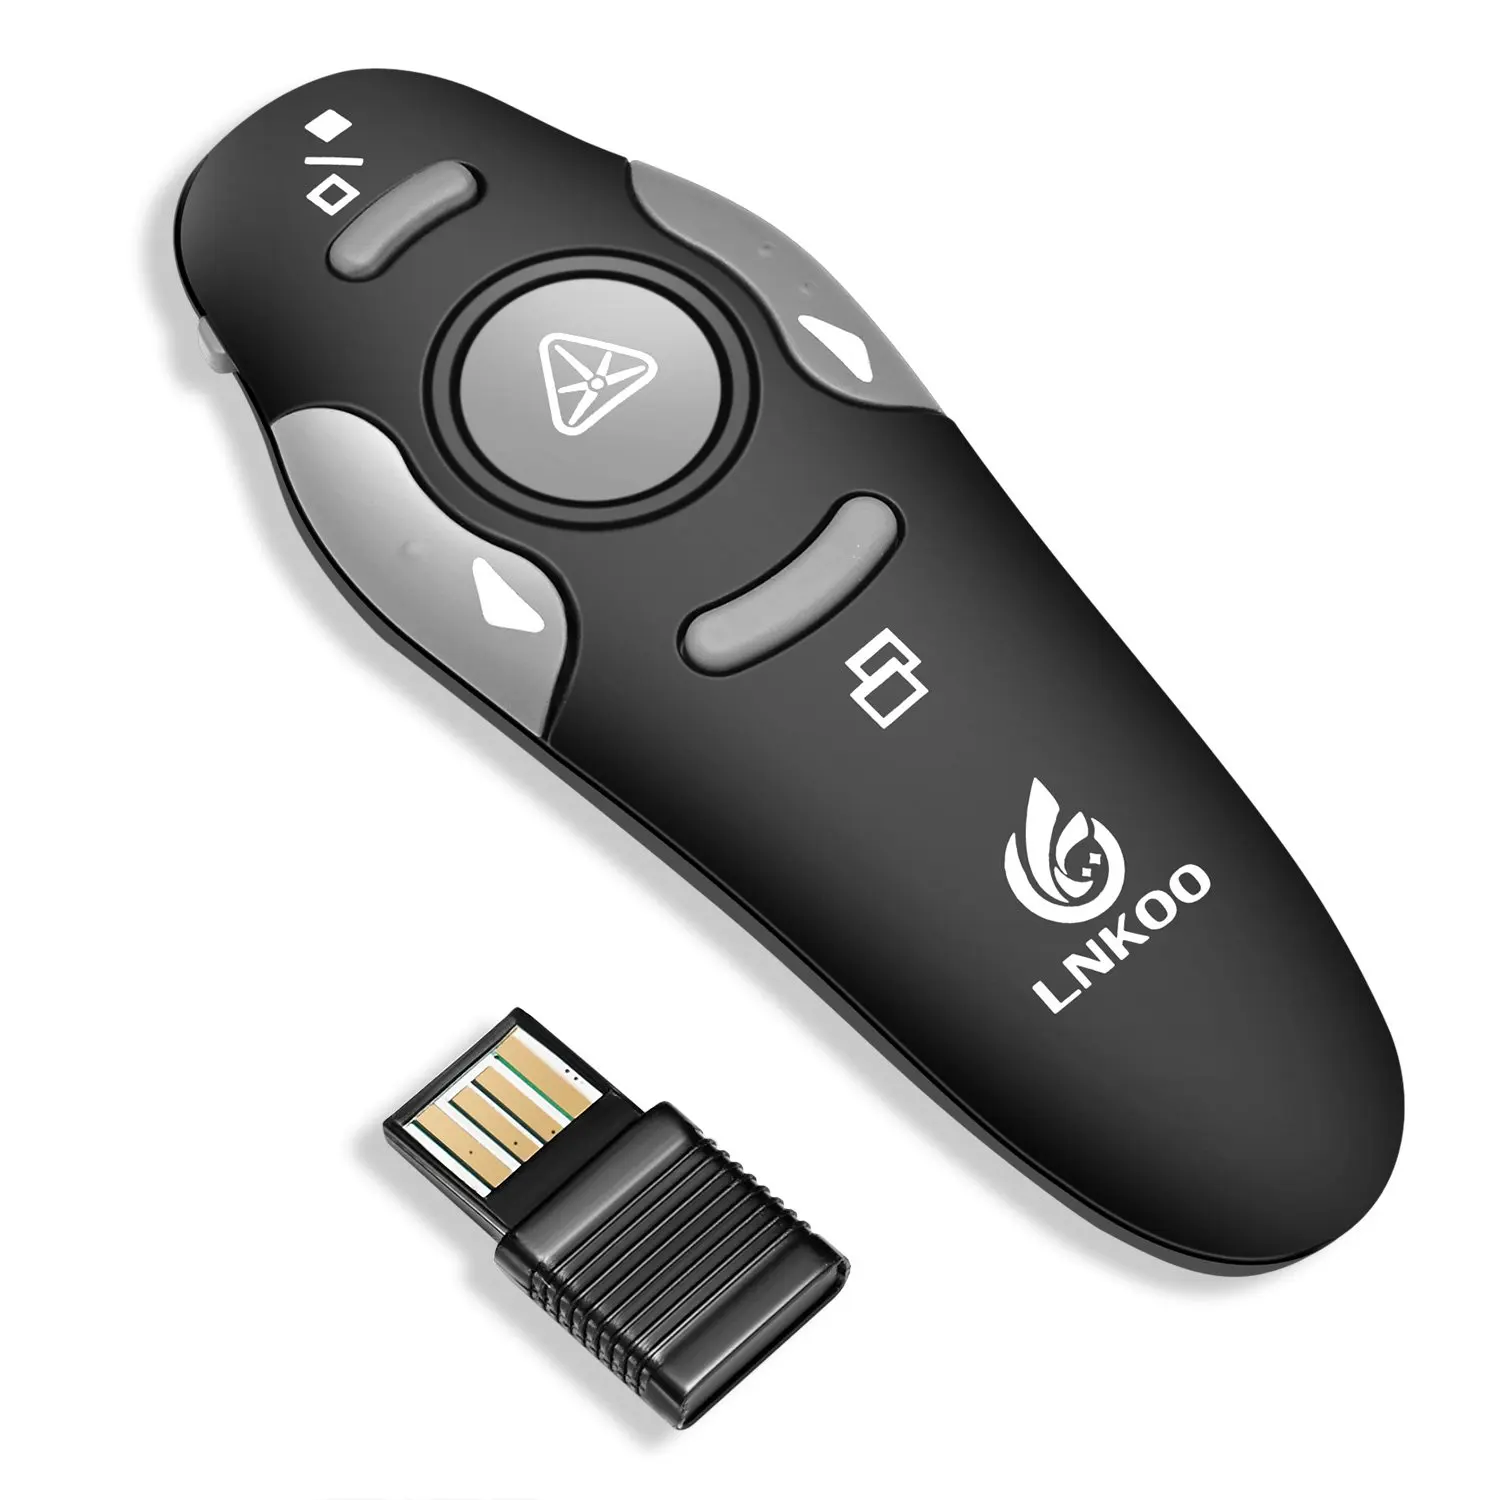 free mouse clicker